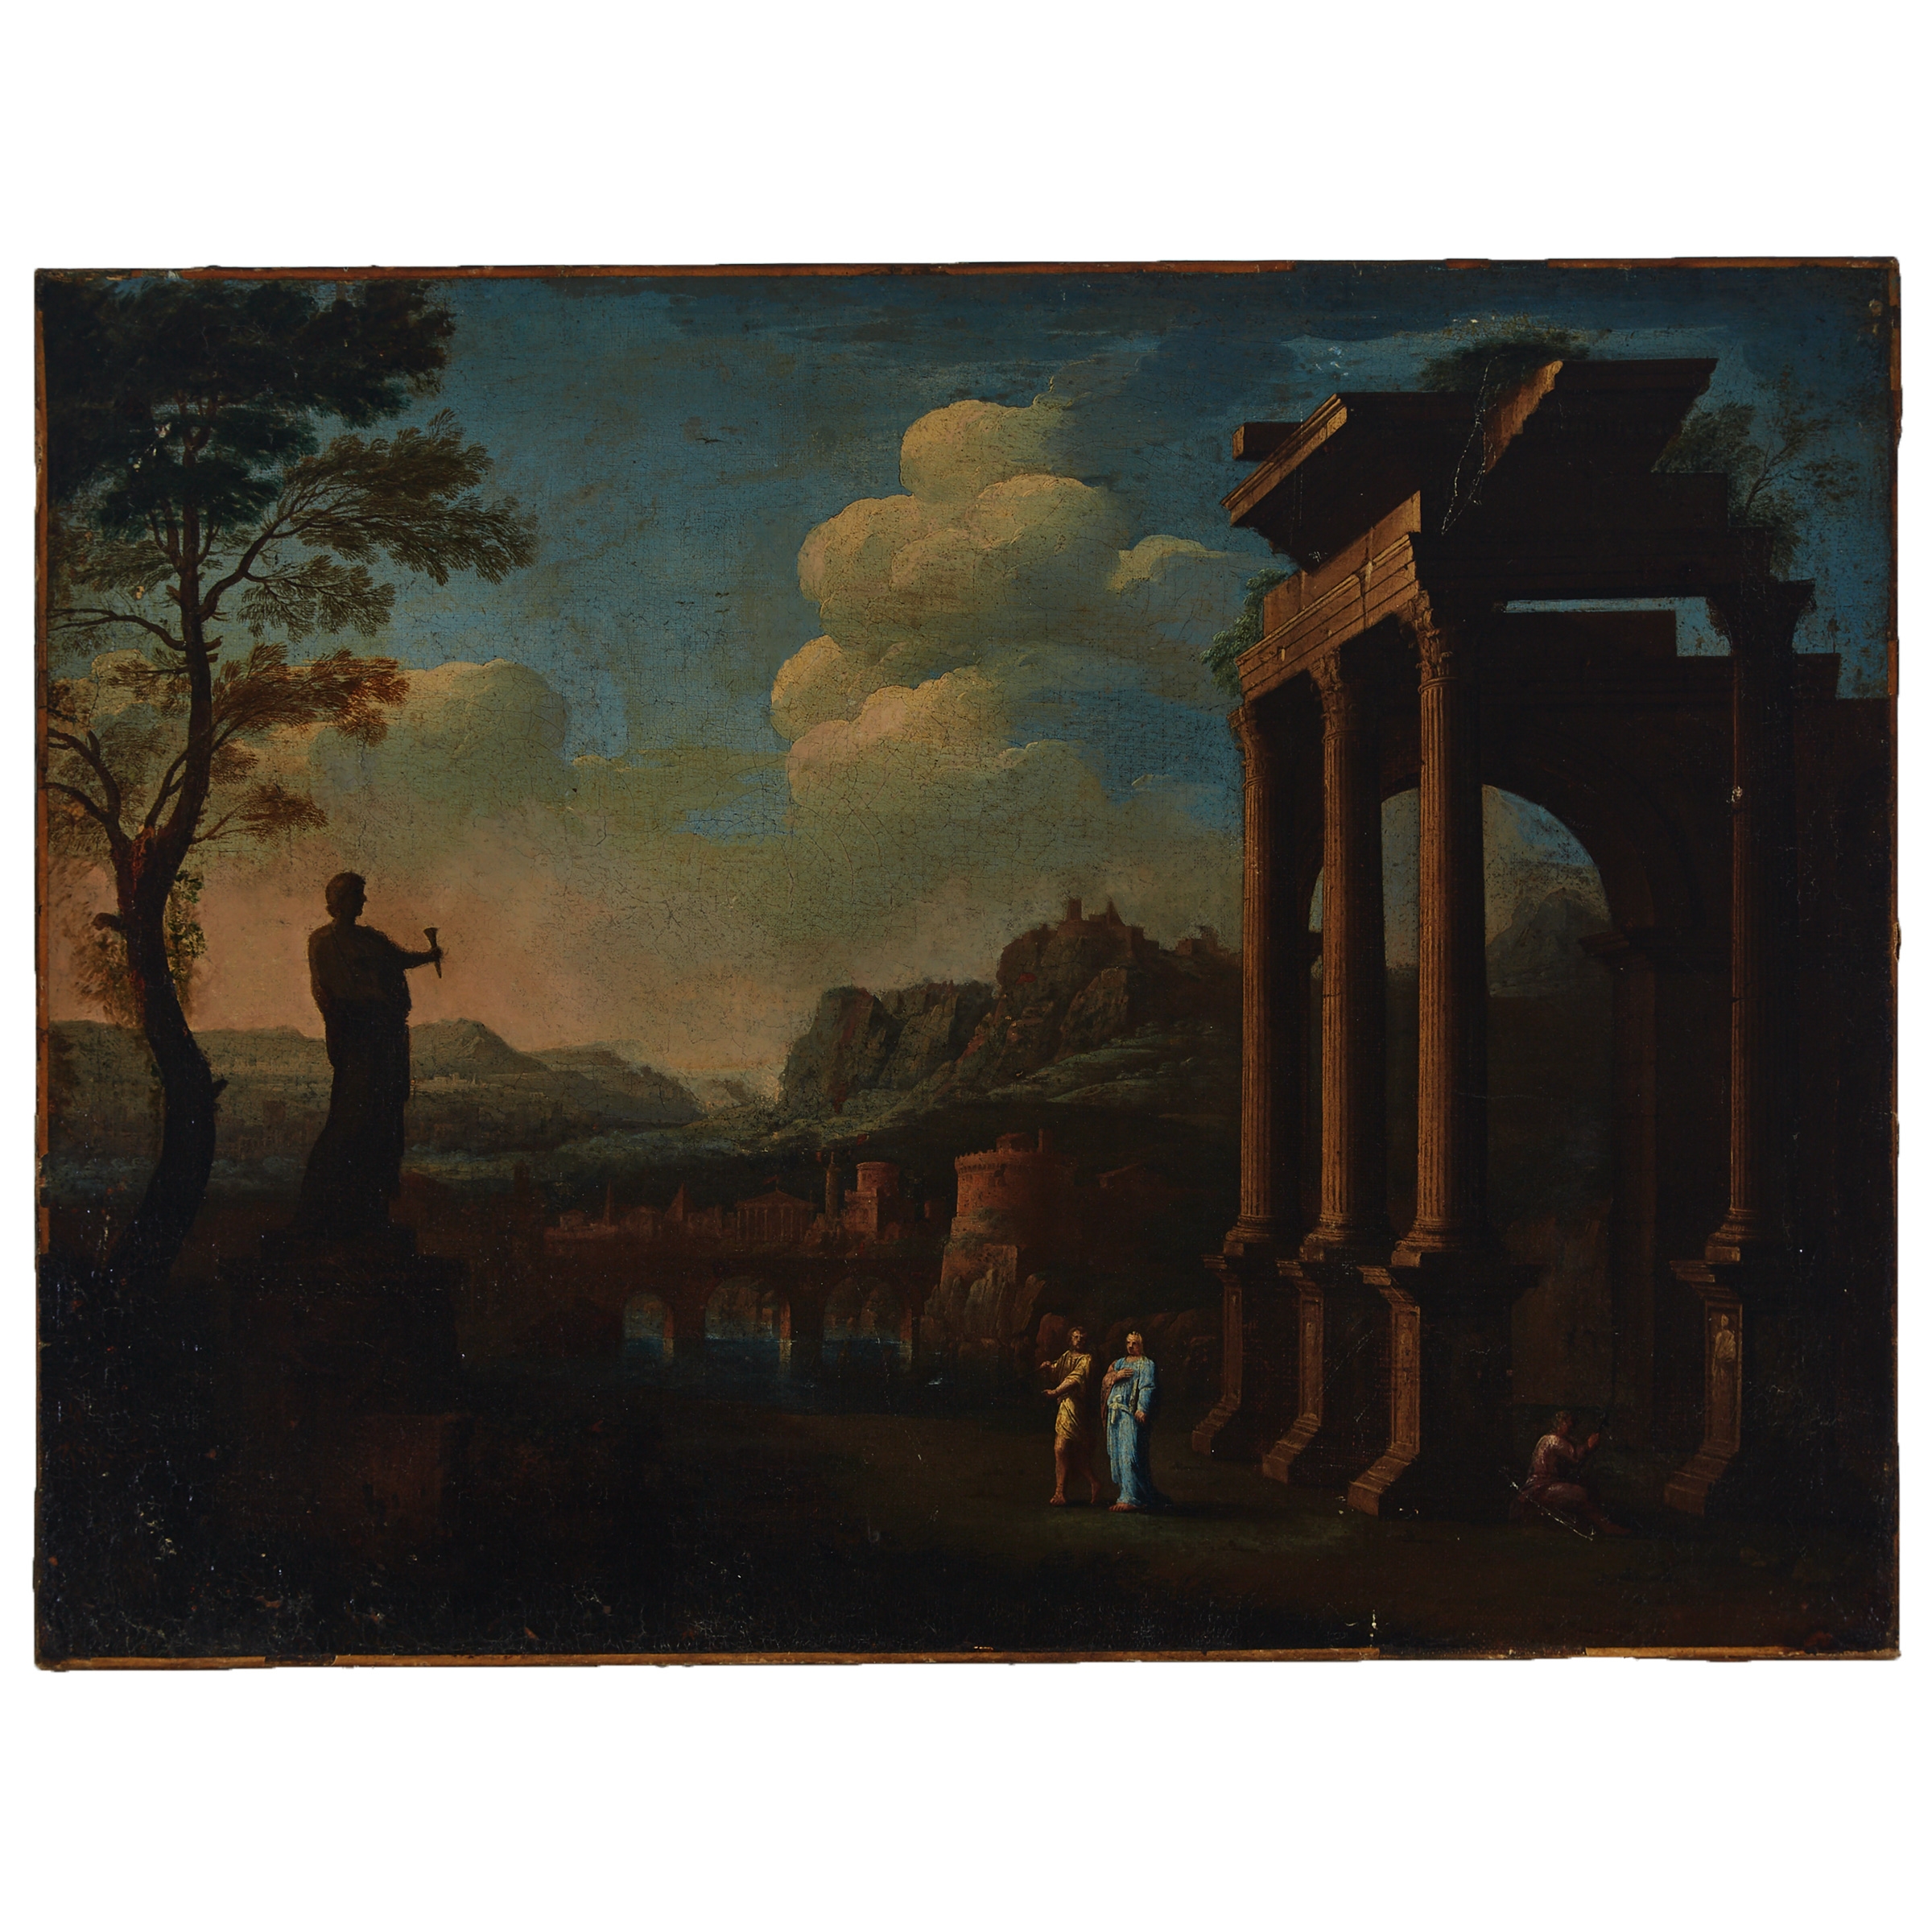 CAPRICCIO WITH CLASSICALLY DRAPED HUNTSMEN AT THE COLOSSUS OF RHODES AMID A SHRINE IN AN EXTENSIVE LANDSCAPE WITH AQUEDUCT, CITY VIEWS AND ANTIQUE RUINS by Nicolas Poussin